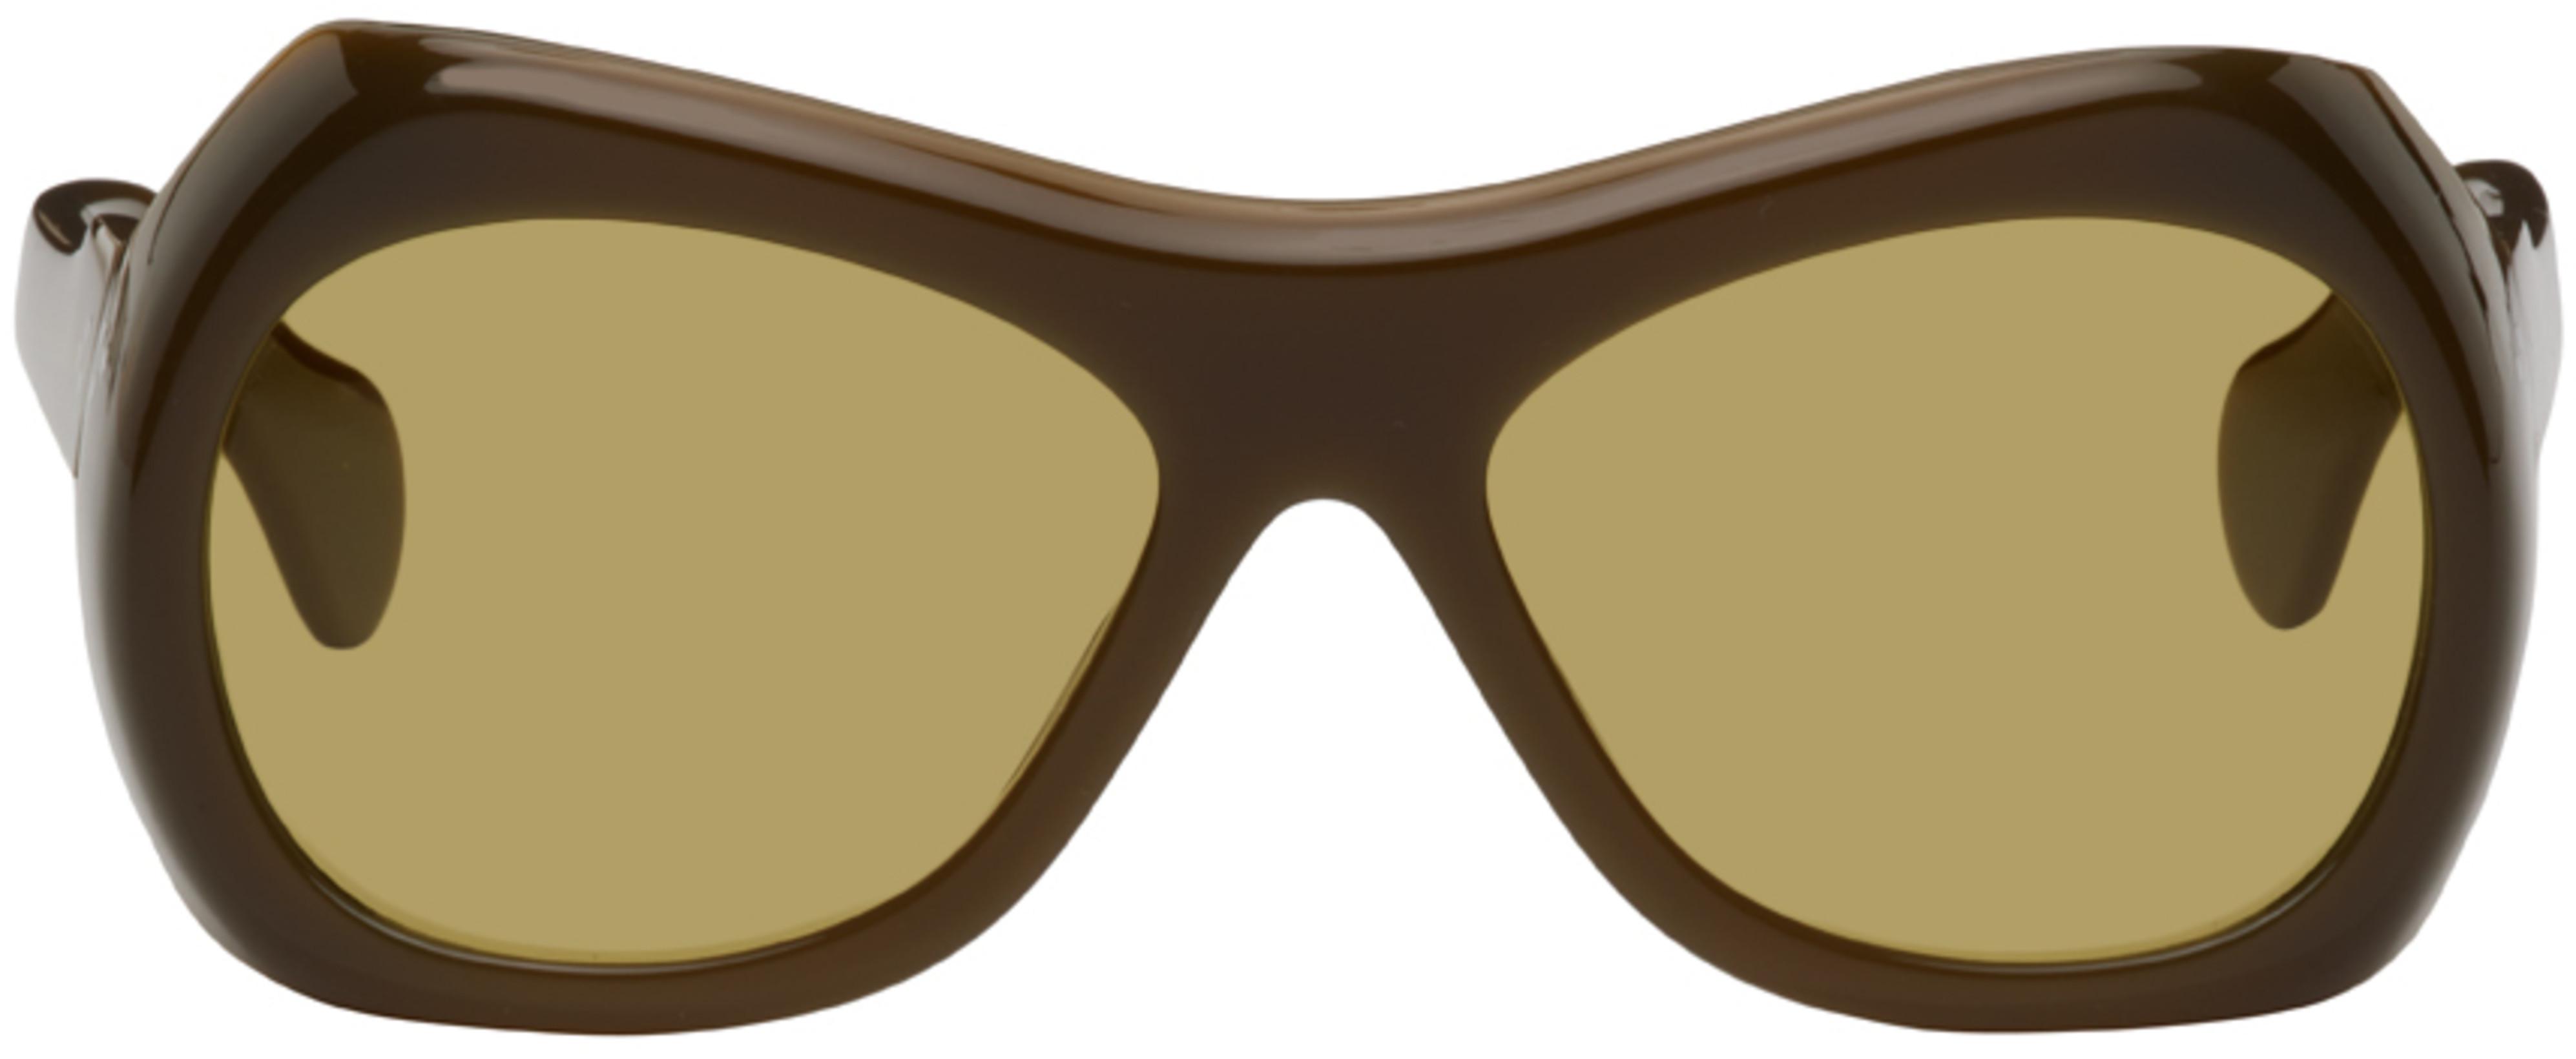 Green Soledad Sunglasses by PORT TANGER